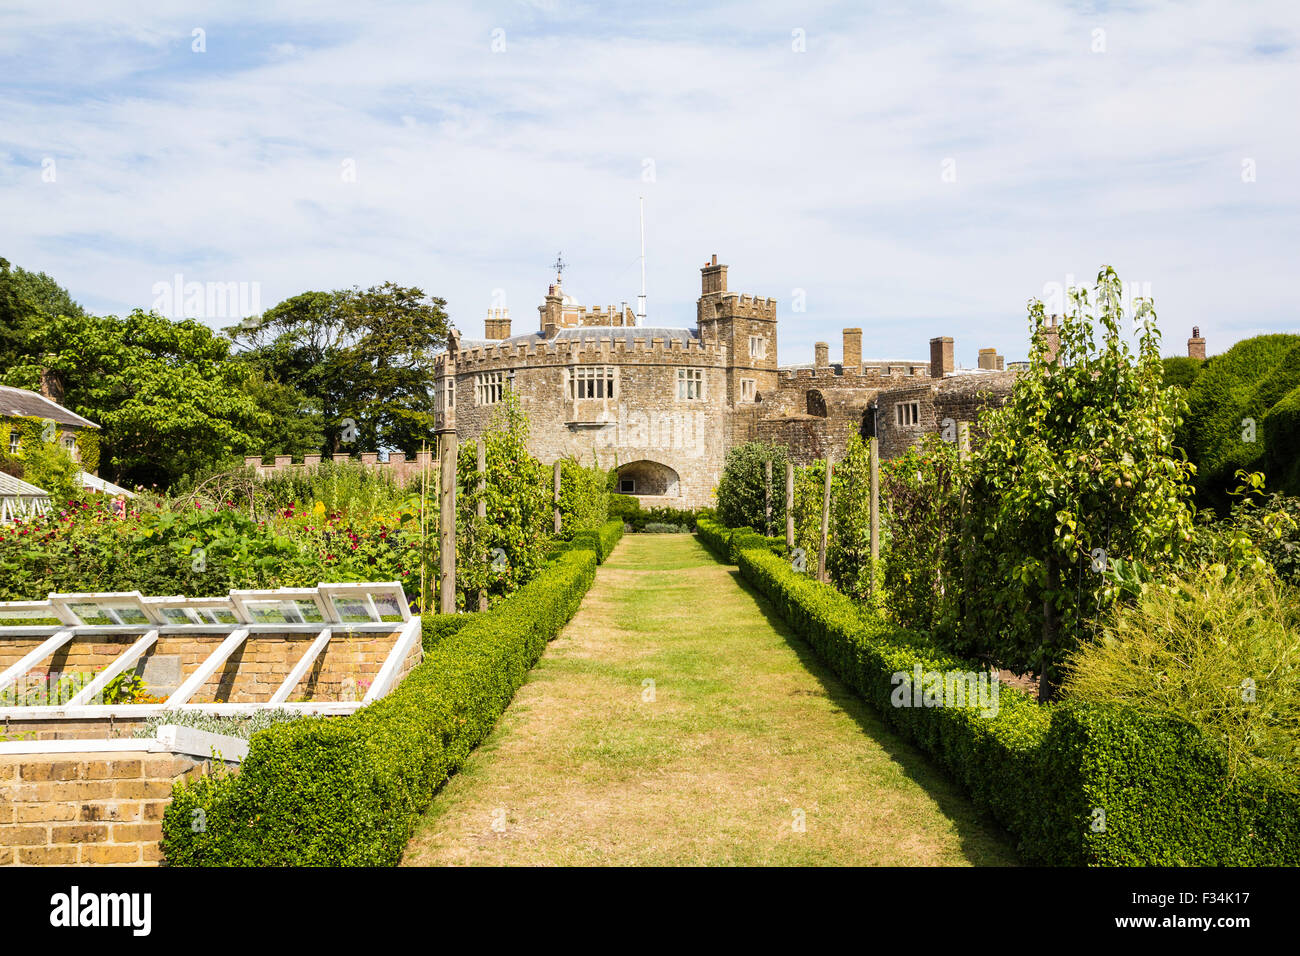 Walmer Tudor castle in Kent, castle in background with the Kitchen Garden, where various greens and other vegetables are grown, in foreground. Stock Photo